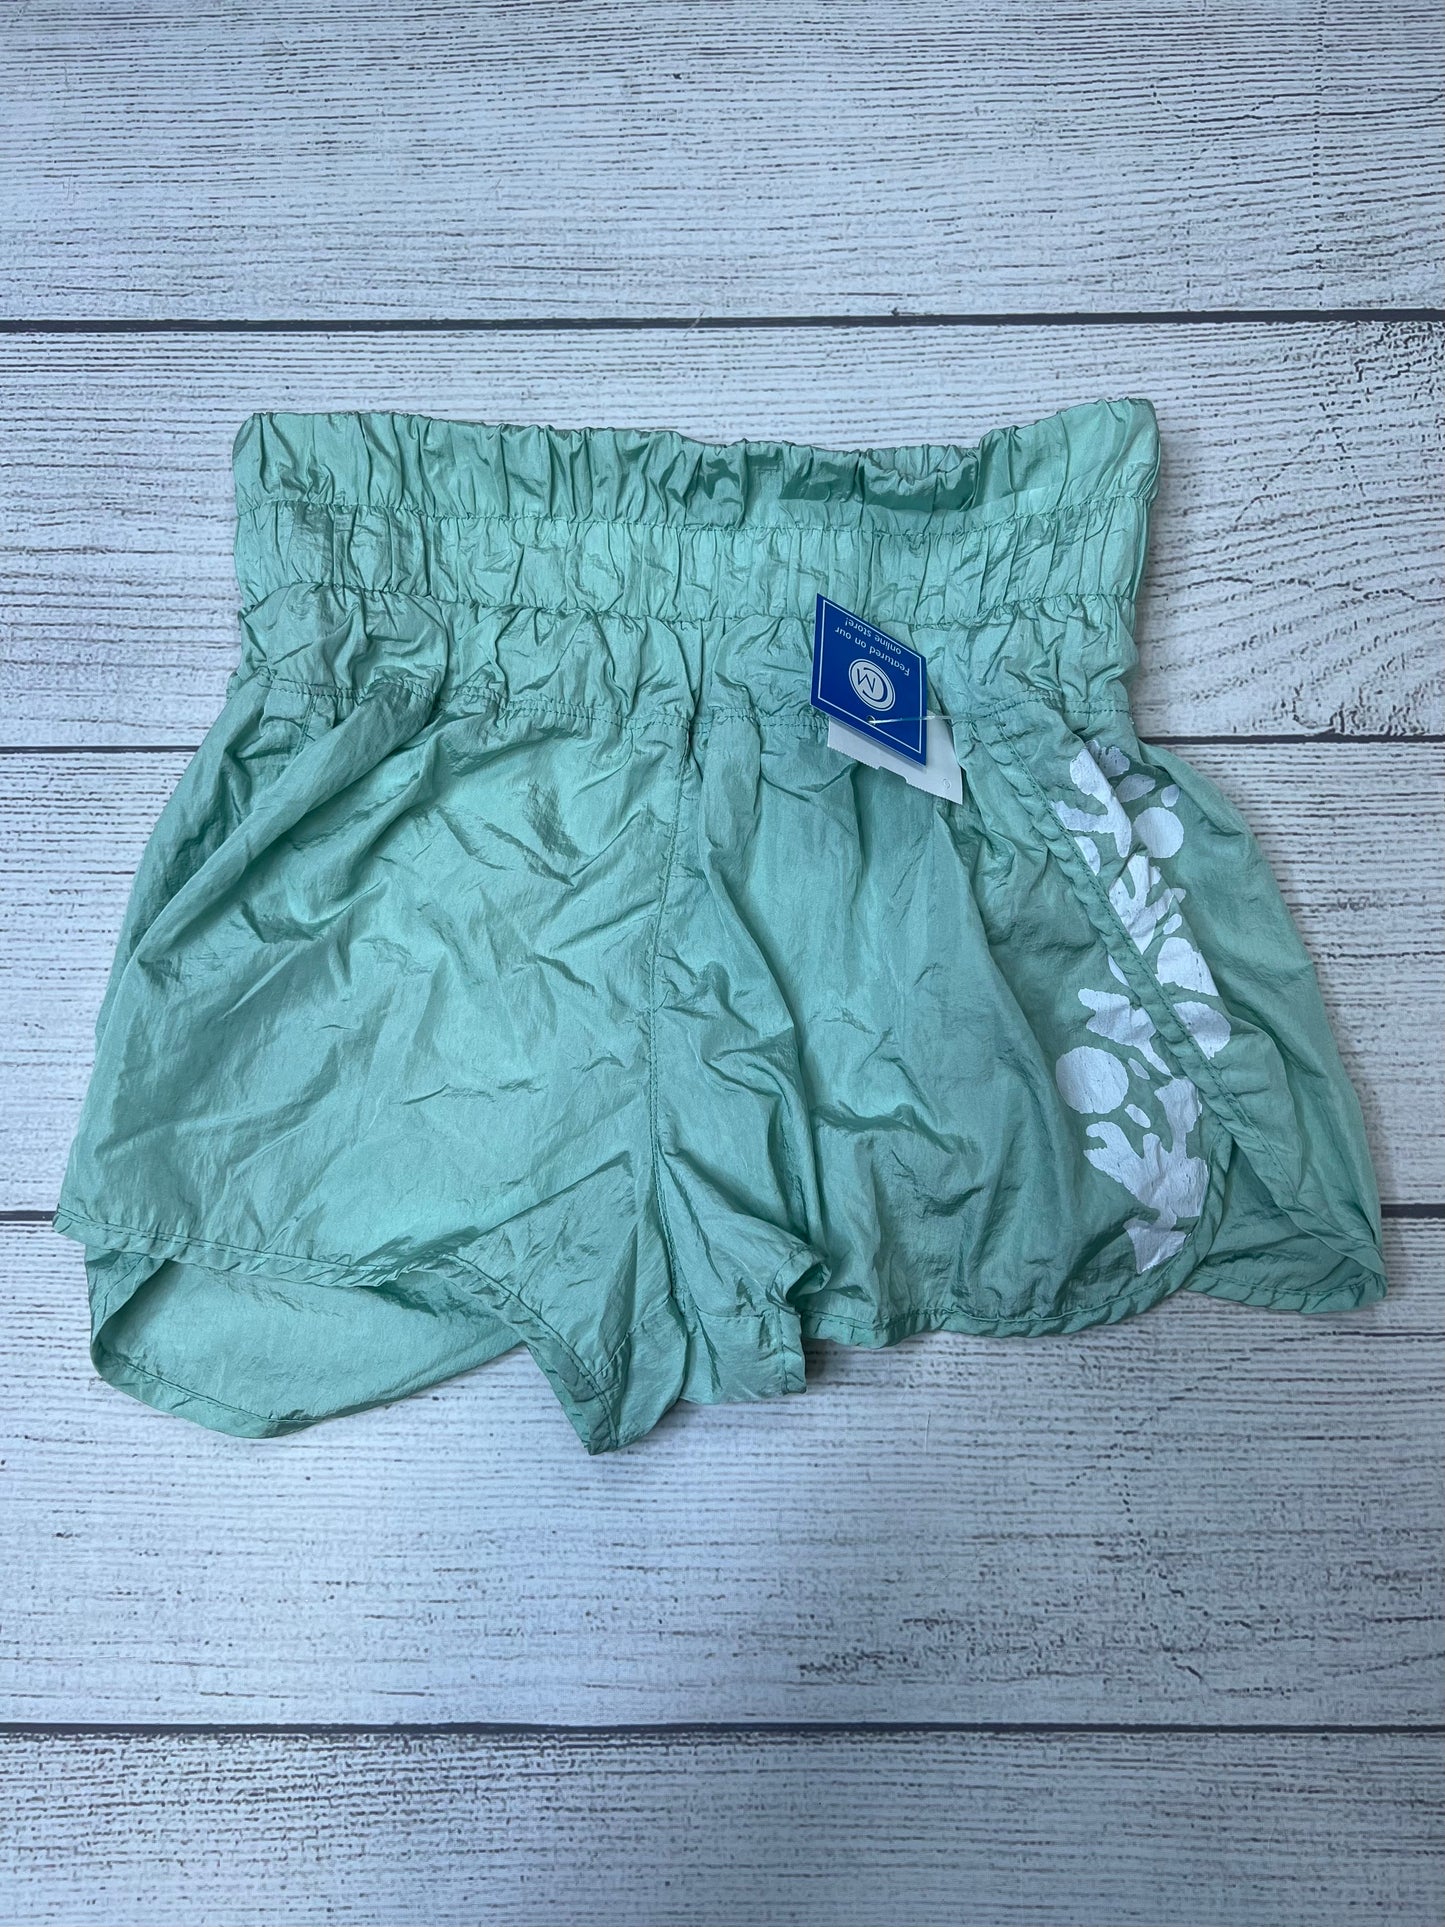 Green Athletic Shorts Free People, Size M